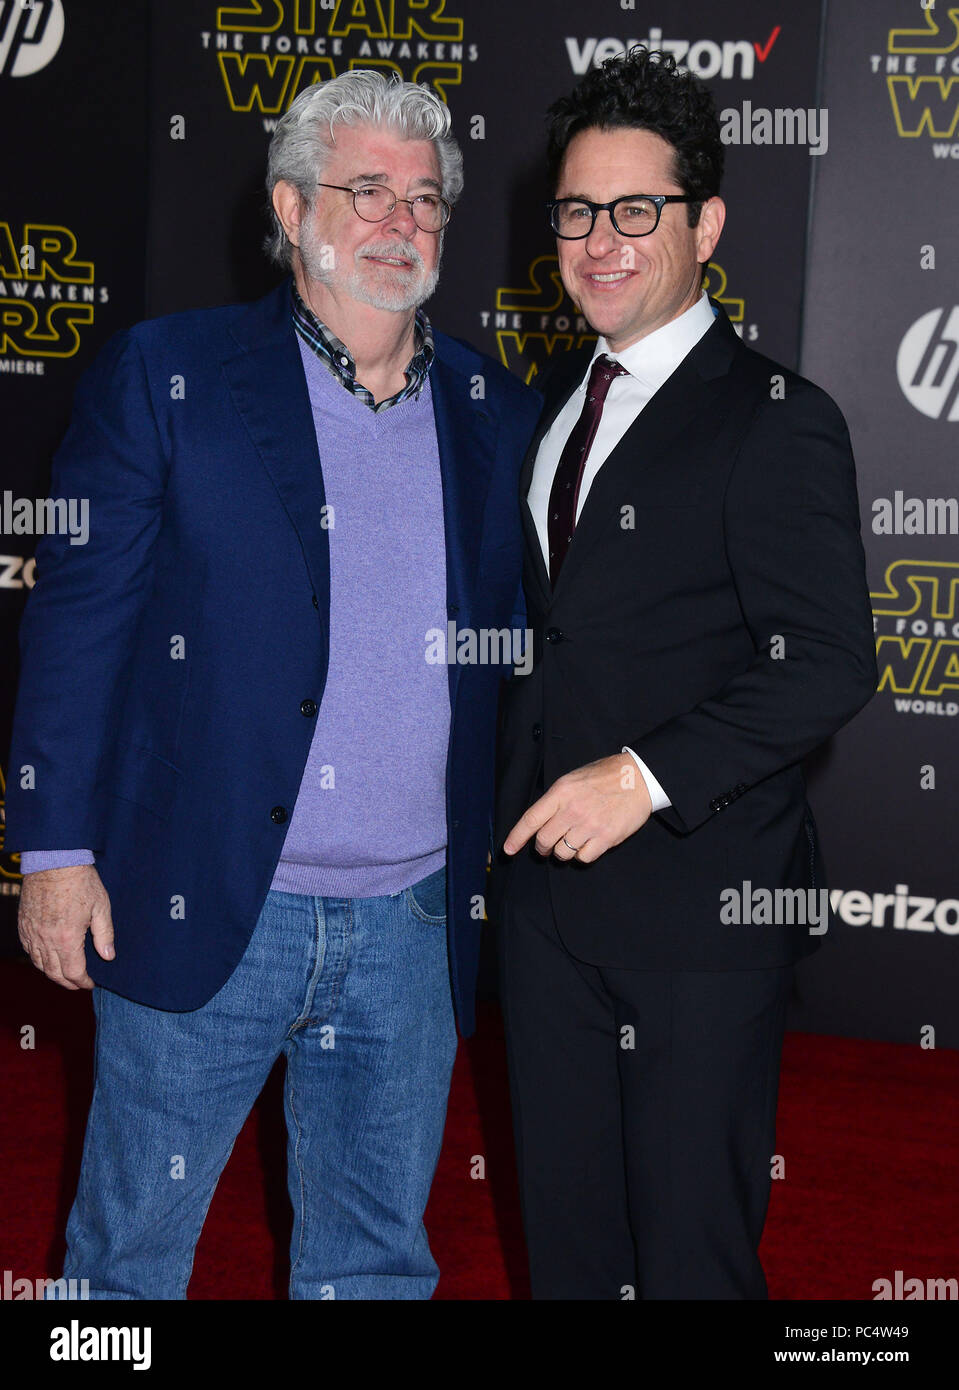 George Lucas,    J.J. Abrams-  director 139 at the Star Wars The Force Awakens Premiere at the Dolby Theatre, TCL Chinese Theatre and El Capitan Theatre on December 14, 2015 in Hollywood, George Lucas,    J.J. Abrams-  director 139  Event in Hollywood Life - California, Red Carpet Event, USA, Film Industry, Celebrities, Photography, Bestof, Arts Culture and Entertainment, Topix Celebrities fashion, Best of, Hollywood Life, Event in Hollywood Life - California, Red Carpet and backstage, movie celebrities, TV celebrities, Music celebrities, Arts Culture and Entertainment, vertical, one person, P Stock Photo